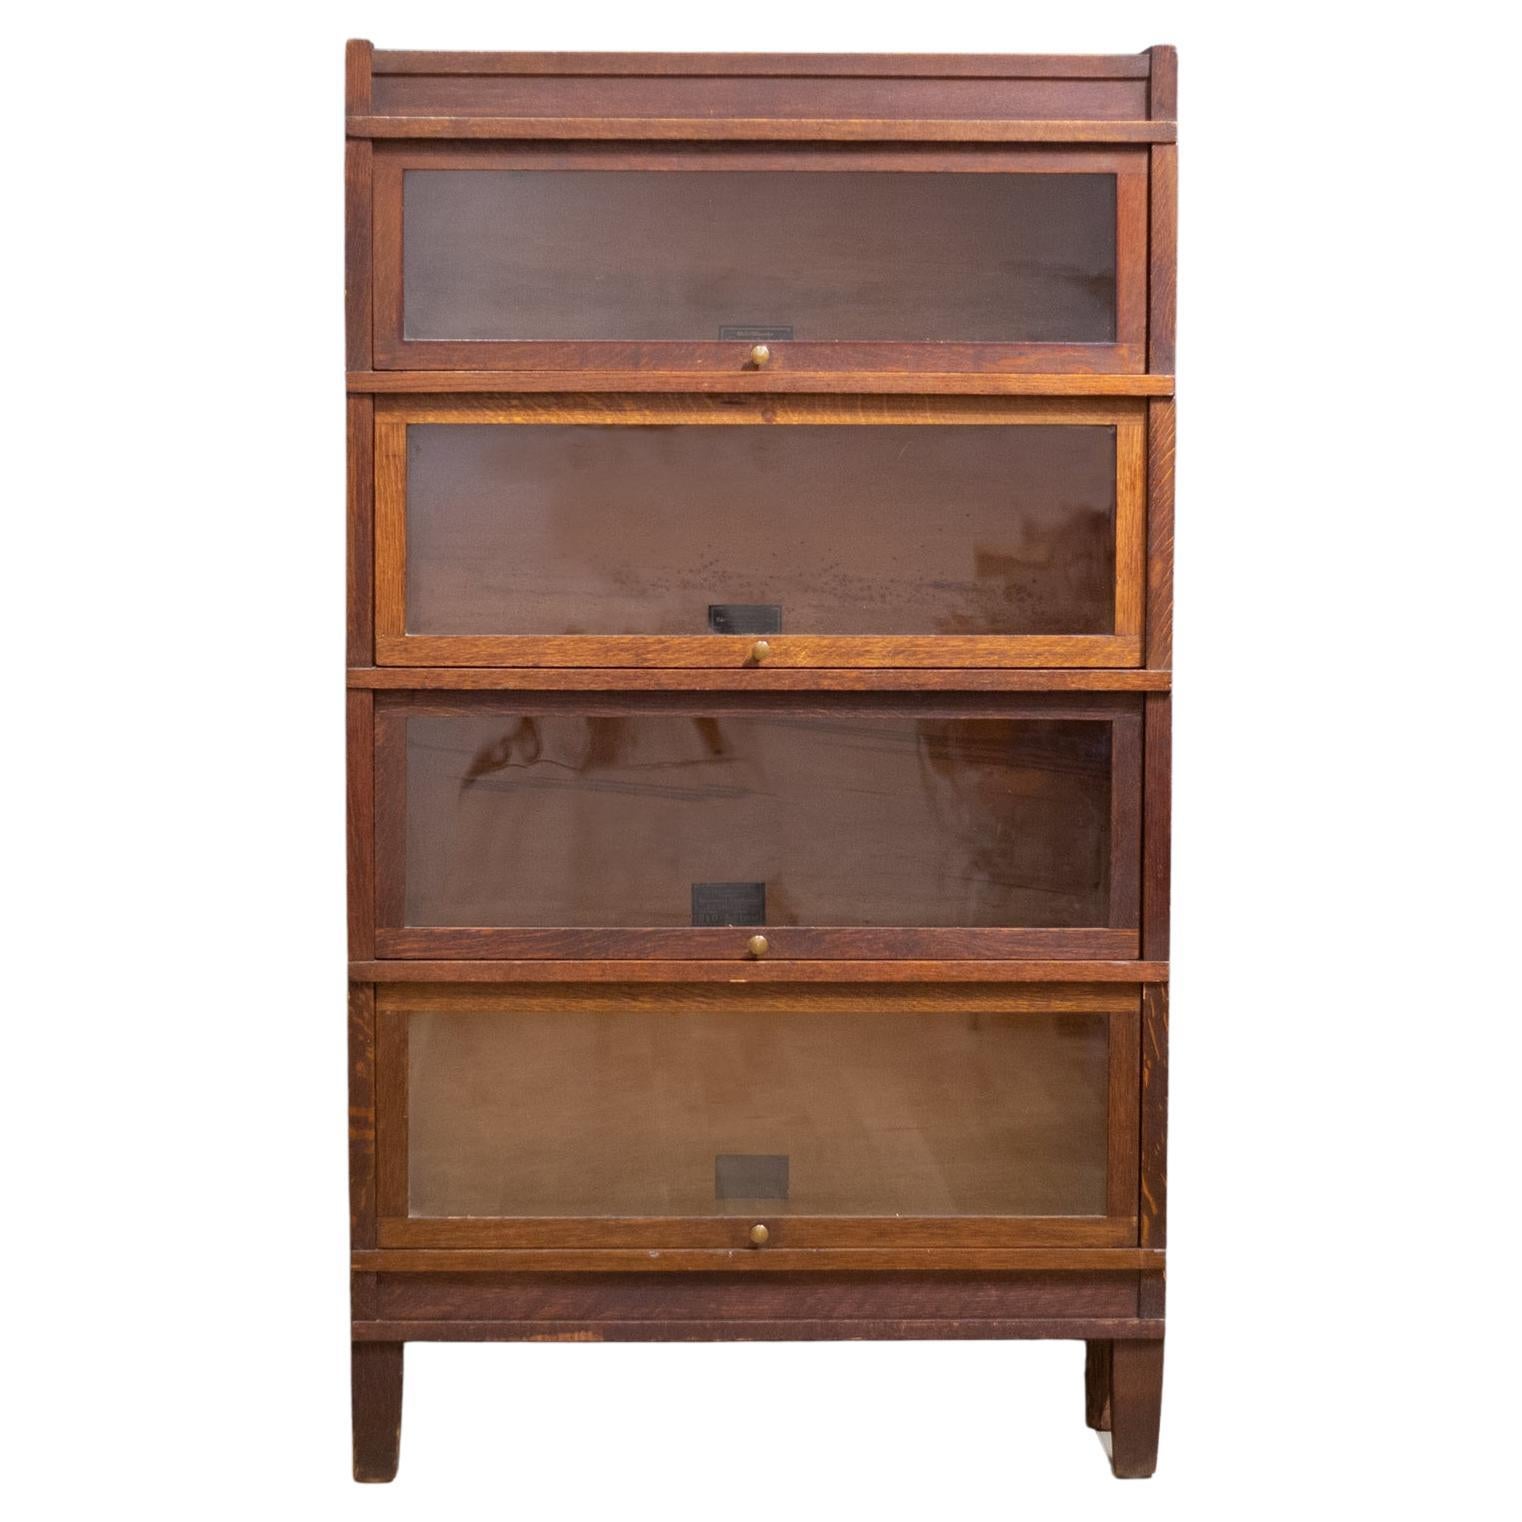 Early 20th C. Globe-Wernicke 4 Stack Lawyer's Bookcase, c.1910-1920